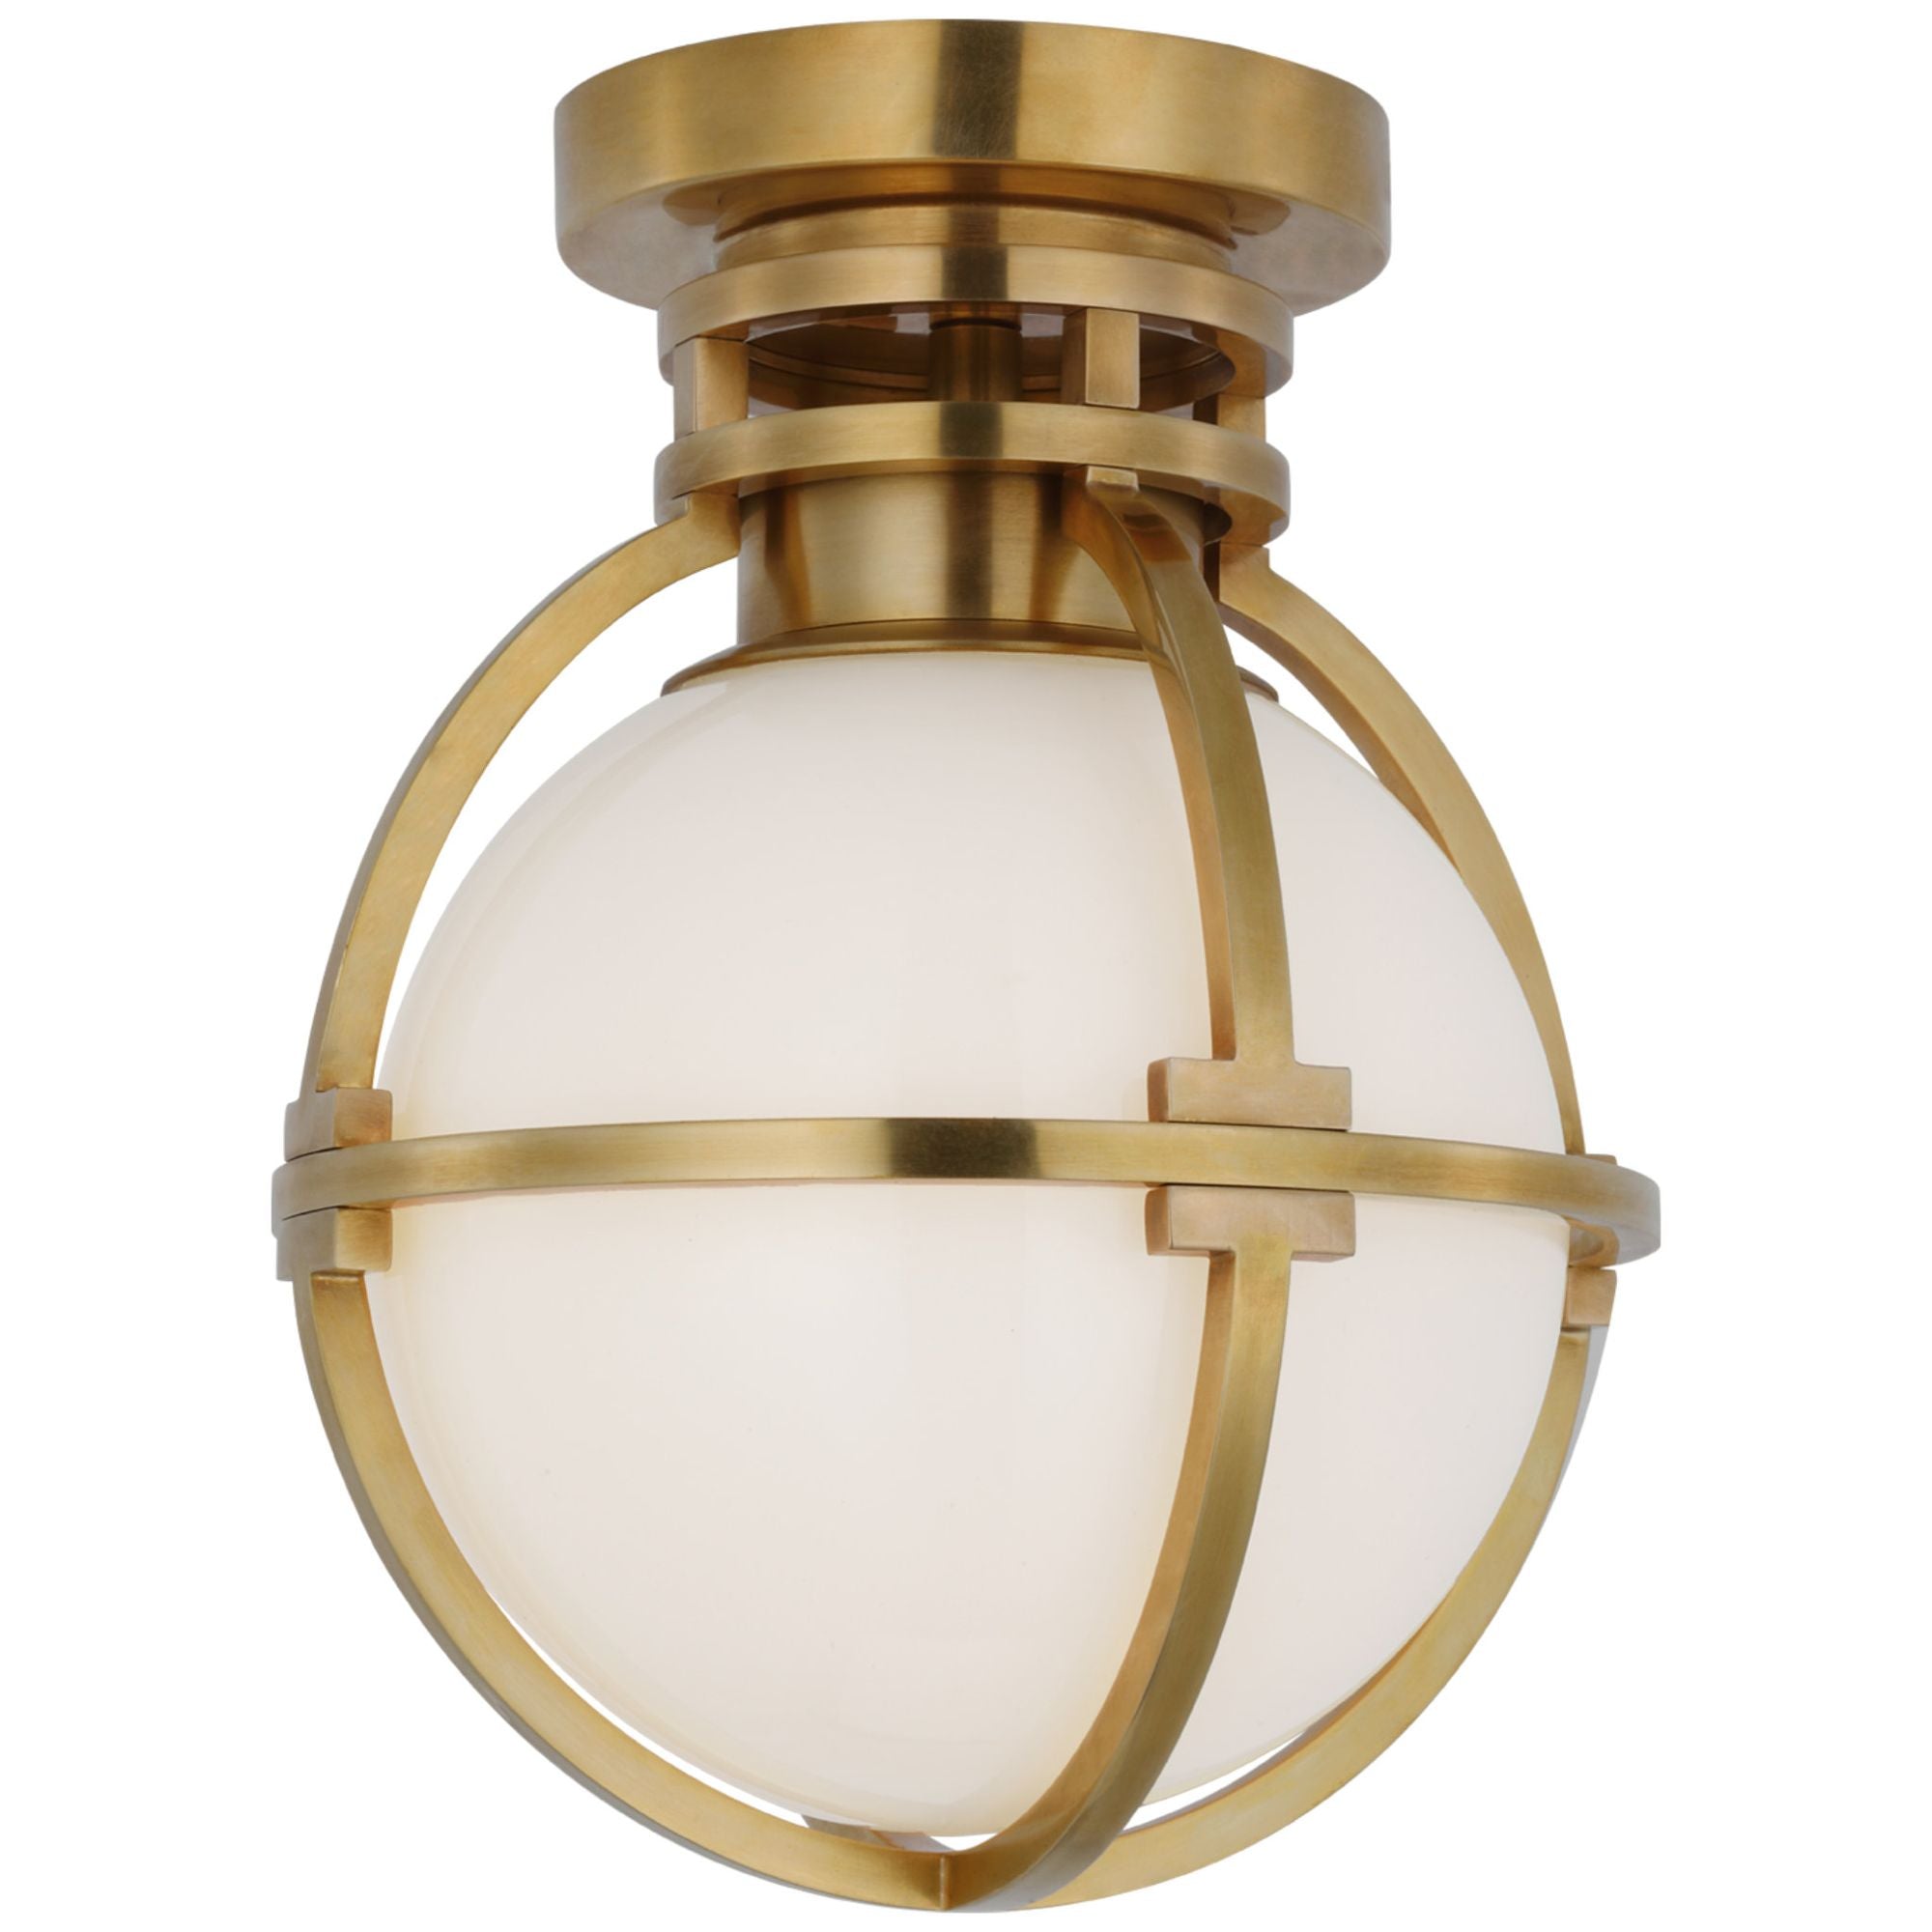 Chapman & Myers Gracie 7" Captured Globe Flush Mount in Antique-Burnished Brass with White Glass